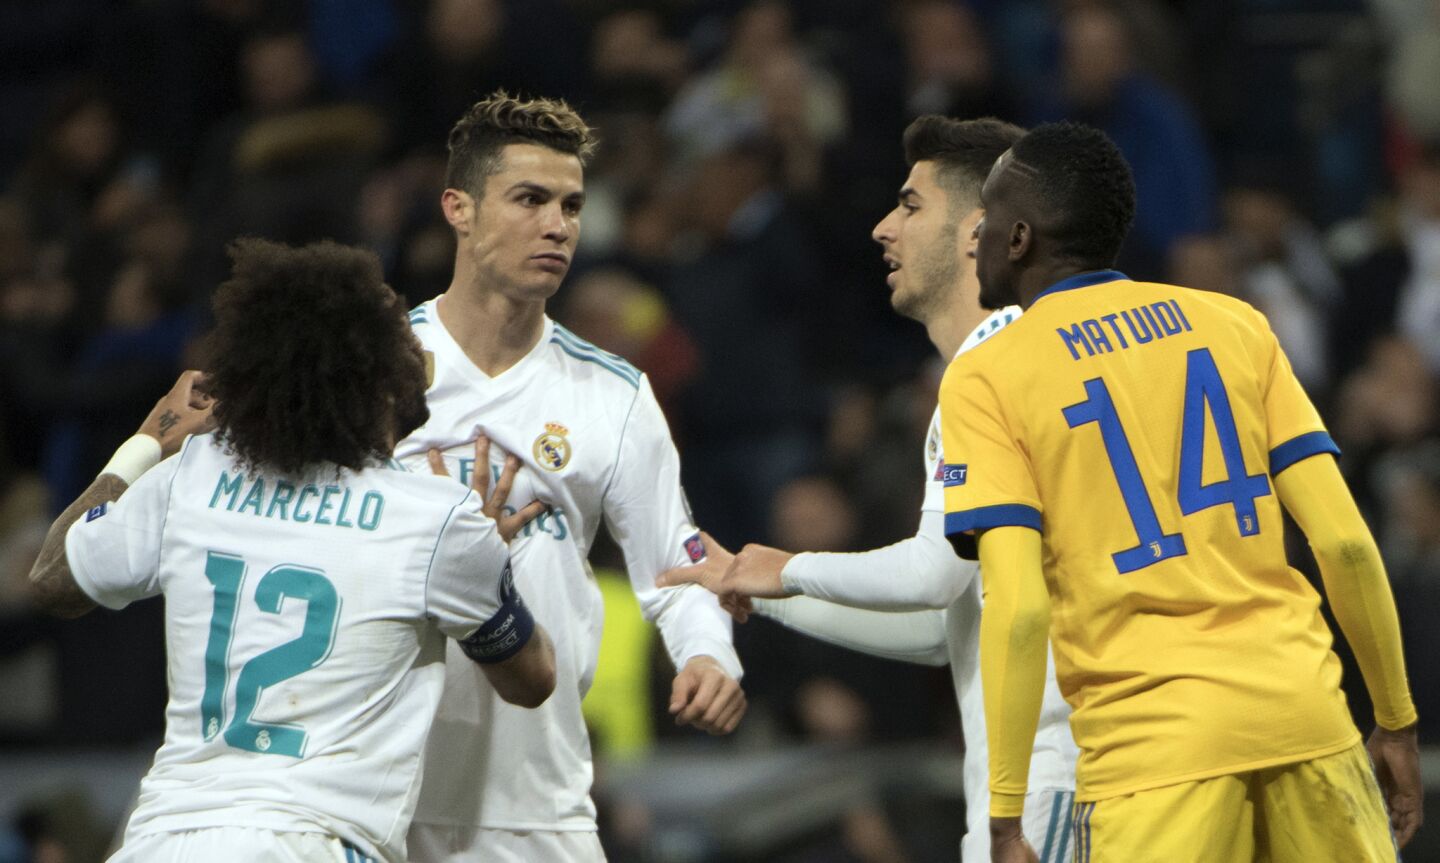 Real Madrid's Portuguese forward Cristiano Ronaldo (2L) confronts Juventus' French midfielder Blaise Matuidi (R) during the UEFA Champions League quarter-final second leg football match between Real Madrid CF and Juventus FC at the Santiago Bernabeu stadium in Madrid on April 11, 2018. / AFP PHOTO / CURTO DE LA TORRECURTO DE LA TORRE/AFP/Getty Images ** OUTS - ELSENT, FPG, CM - OUTS * NM, PH, VA if sourced by CT, LA or MoD **